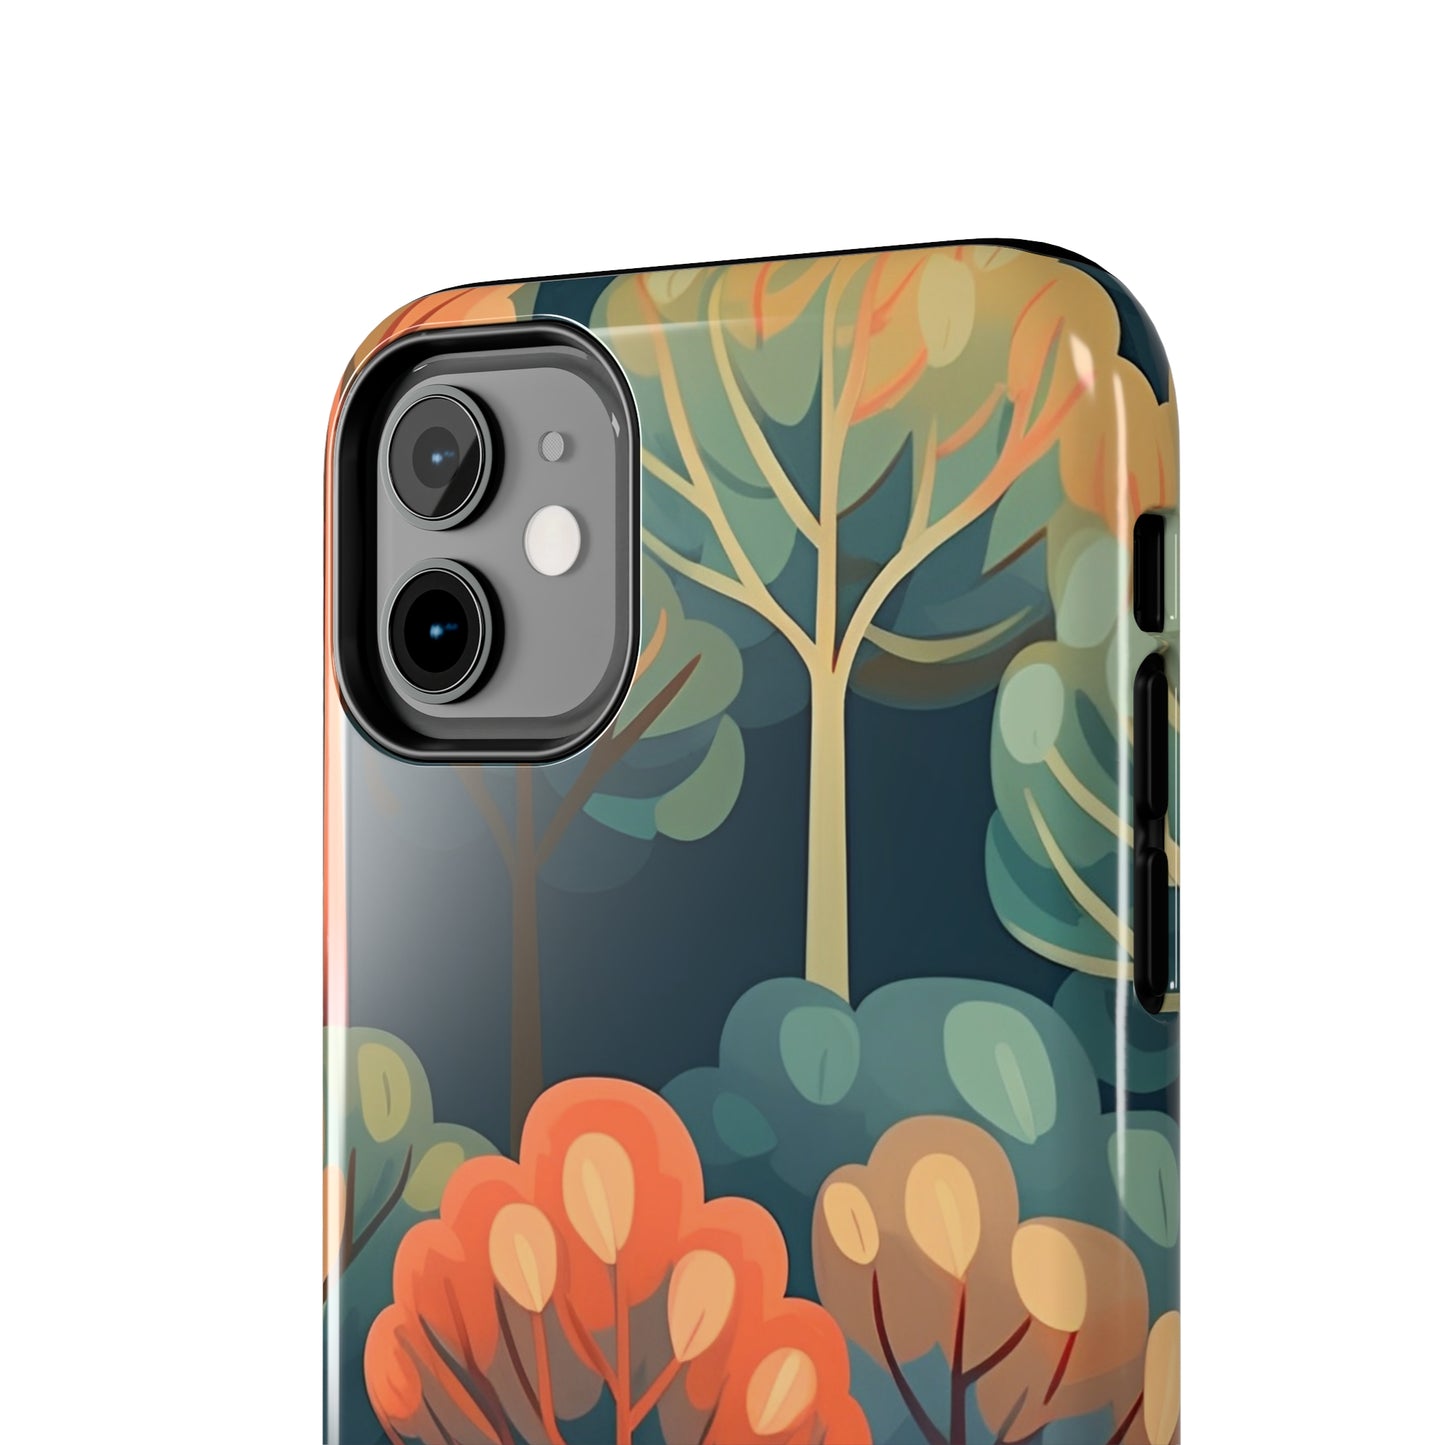 Fall Forest iPhone Tough Phone Cases